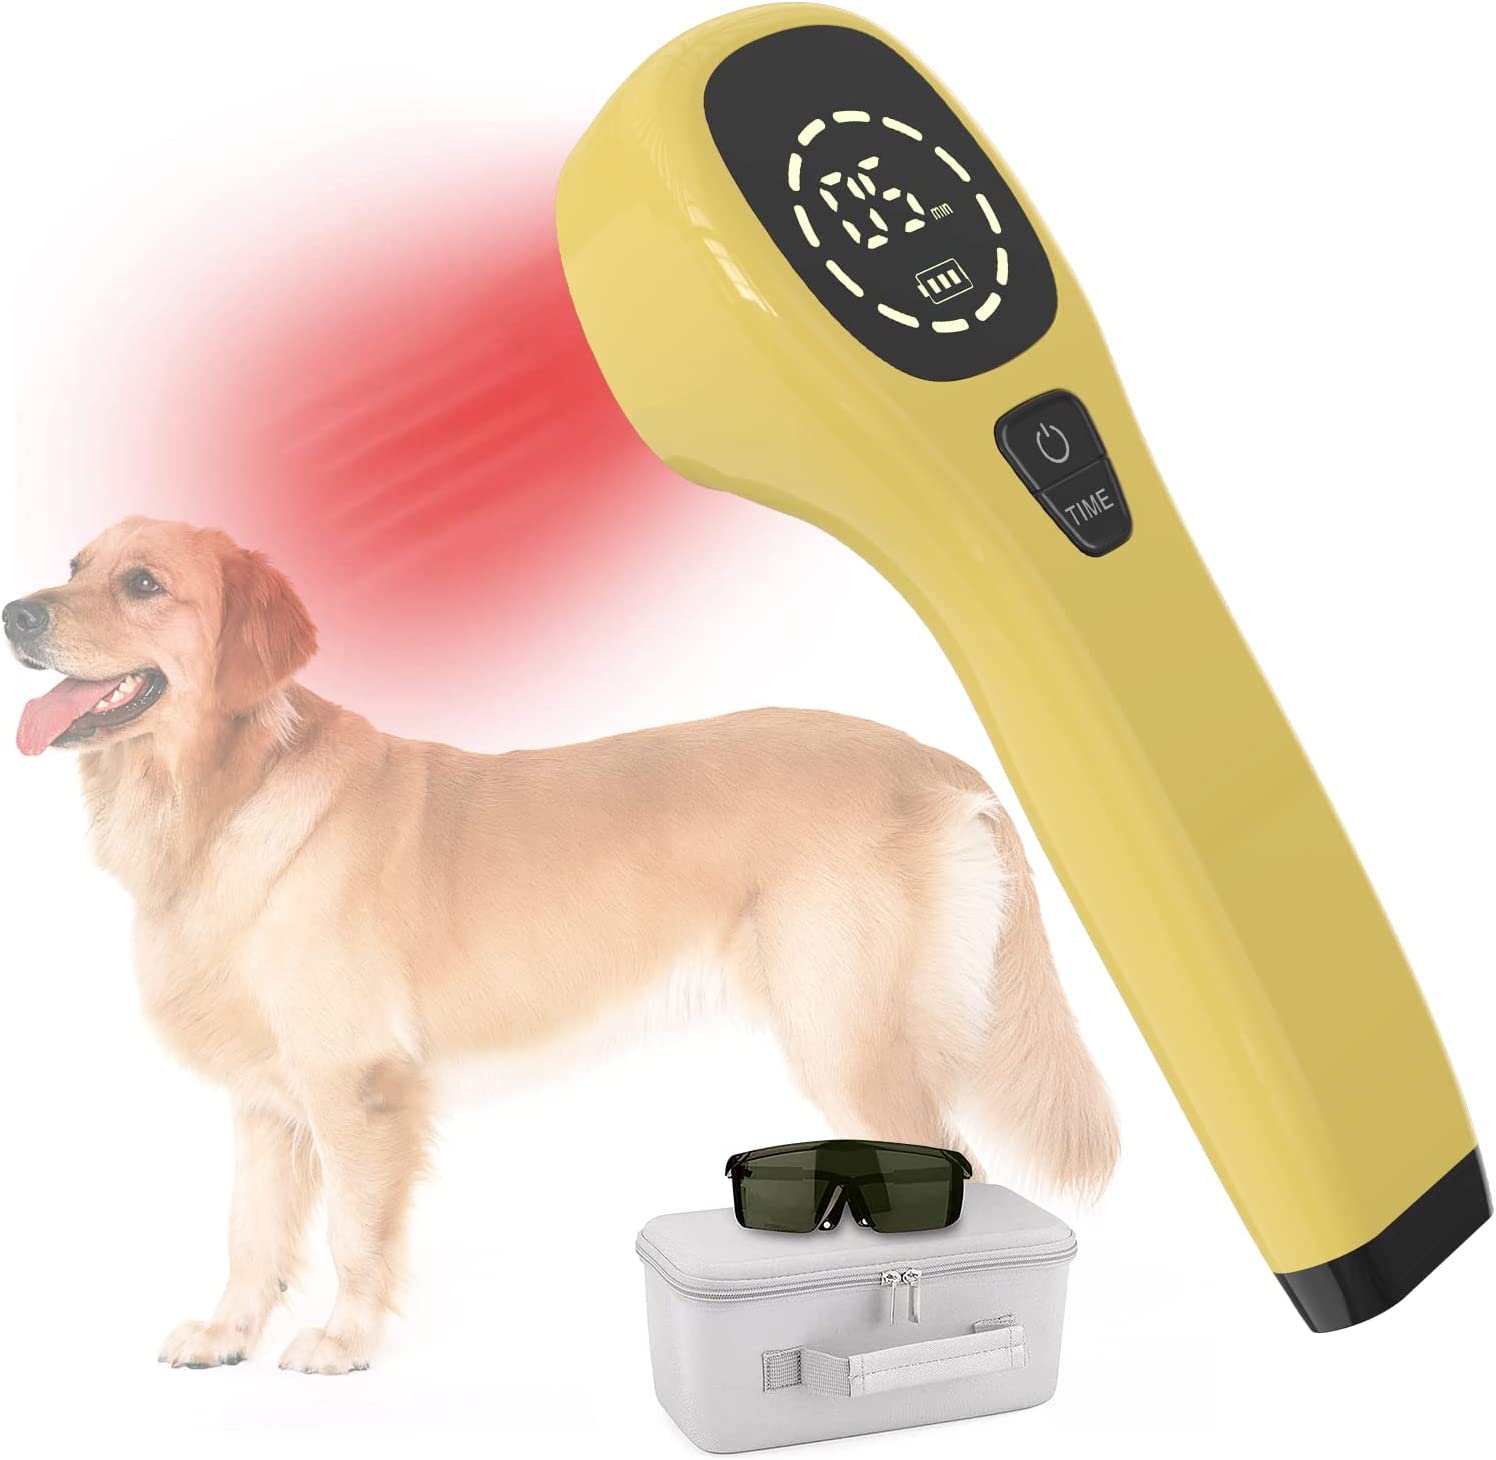 KTS Handheld Cold Laser Therapy for Dogs Red Light Therapy for Pets